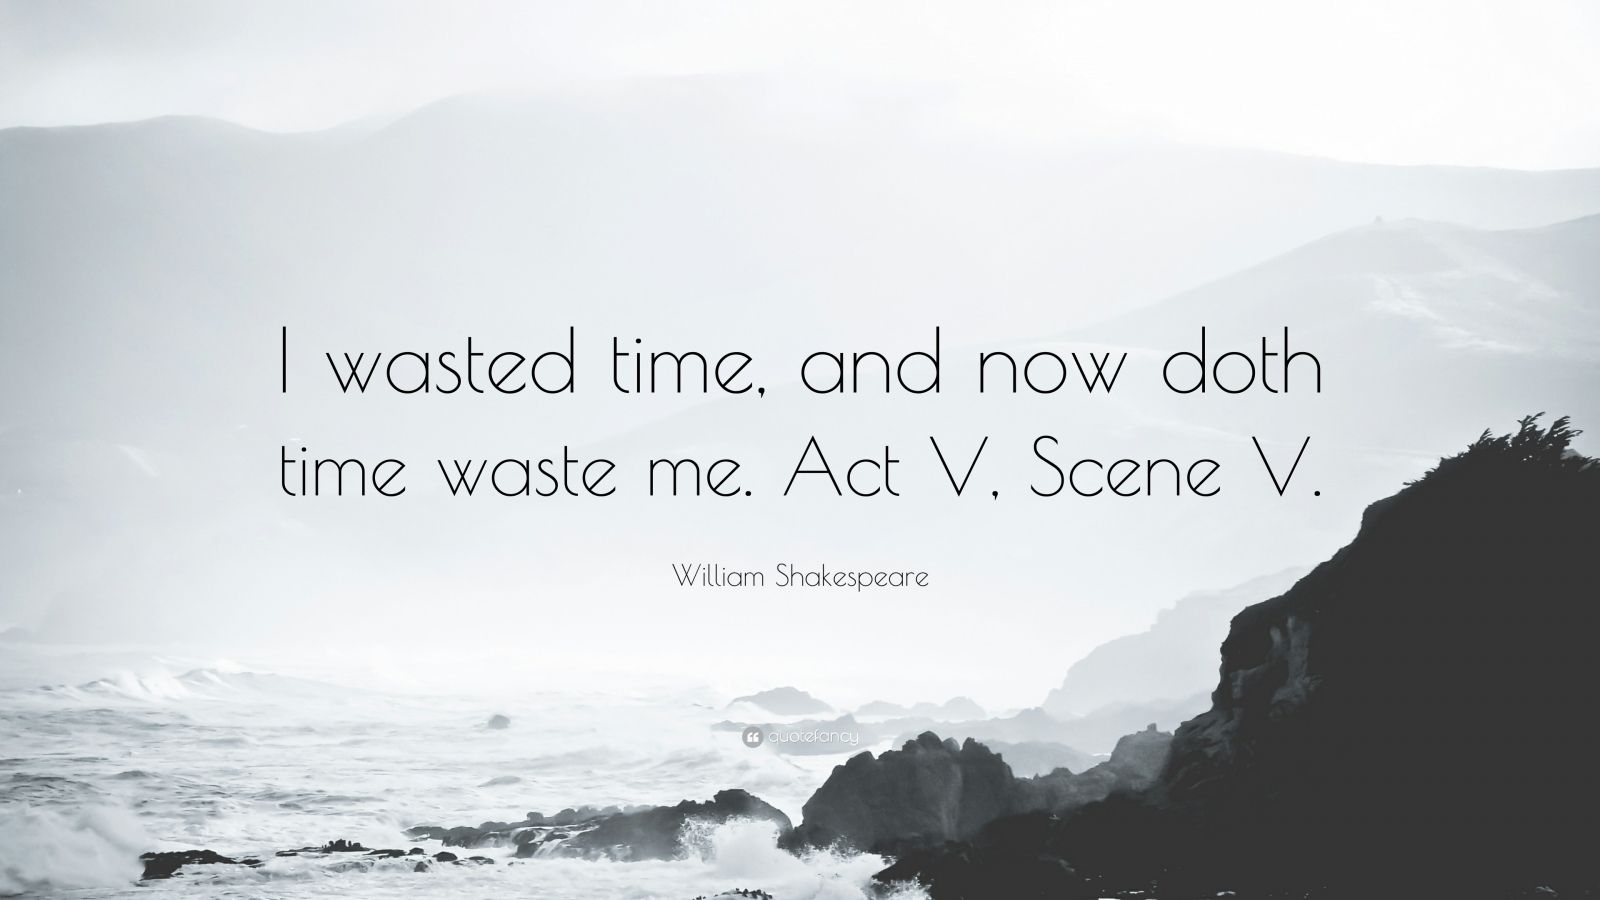 William Shakespeare Quote “I wasted time and now doth time waste me